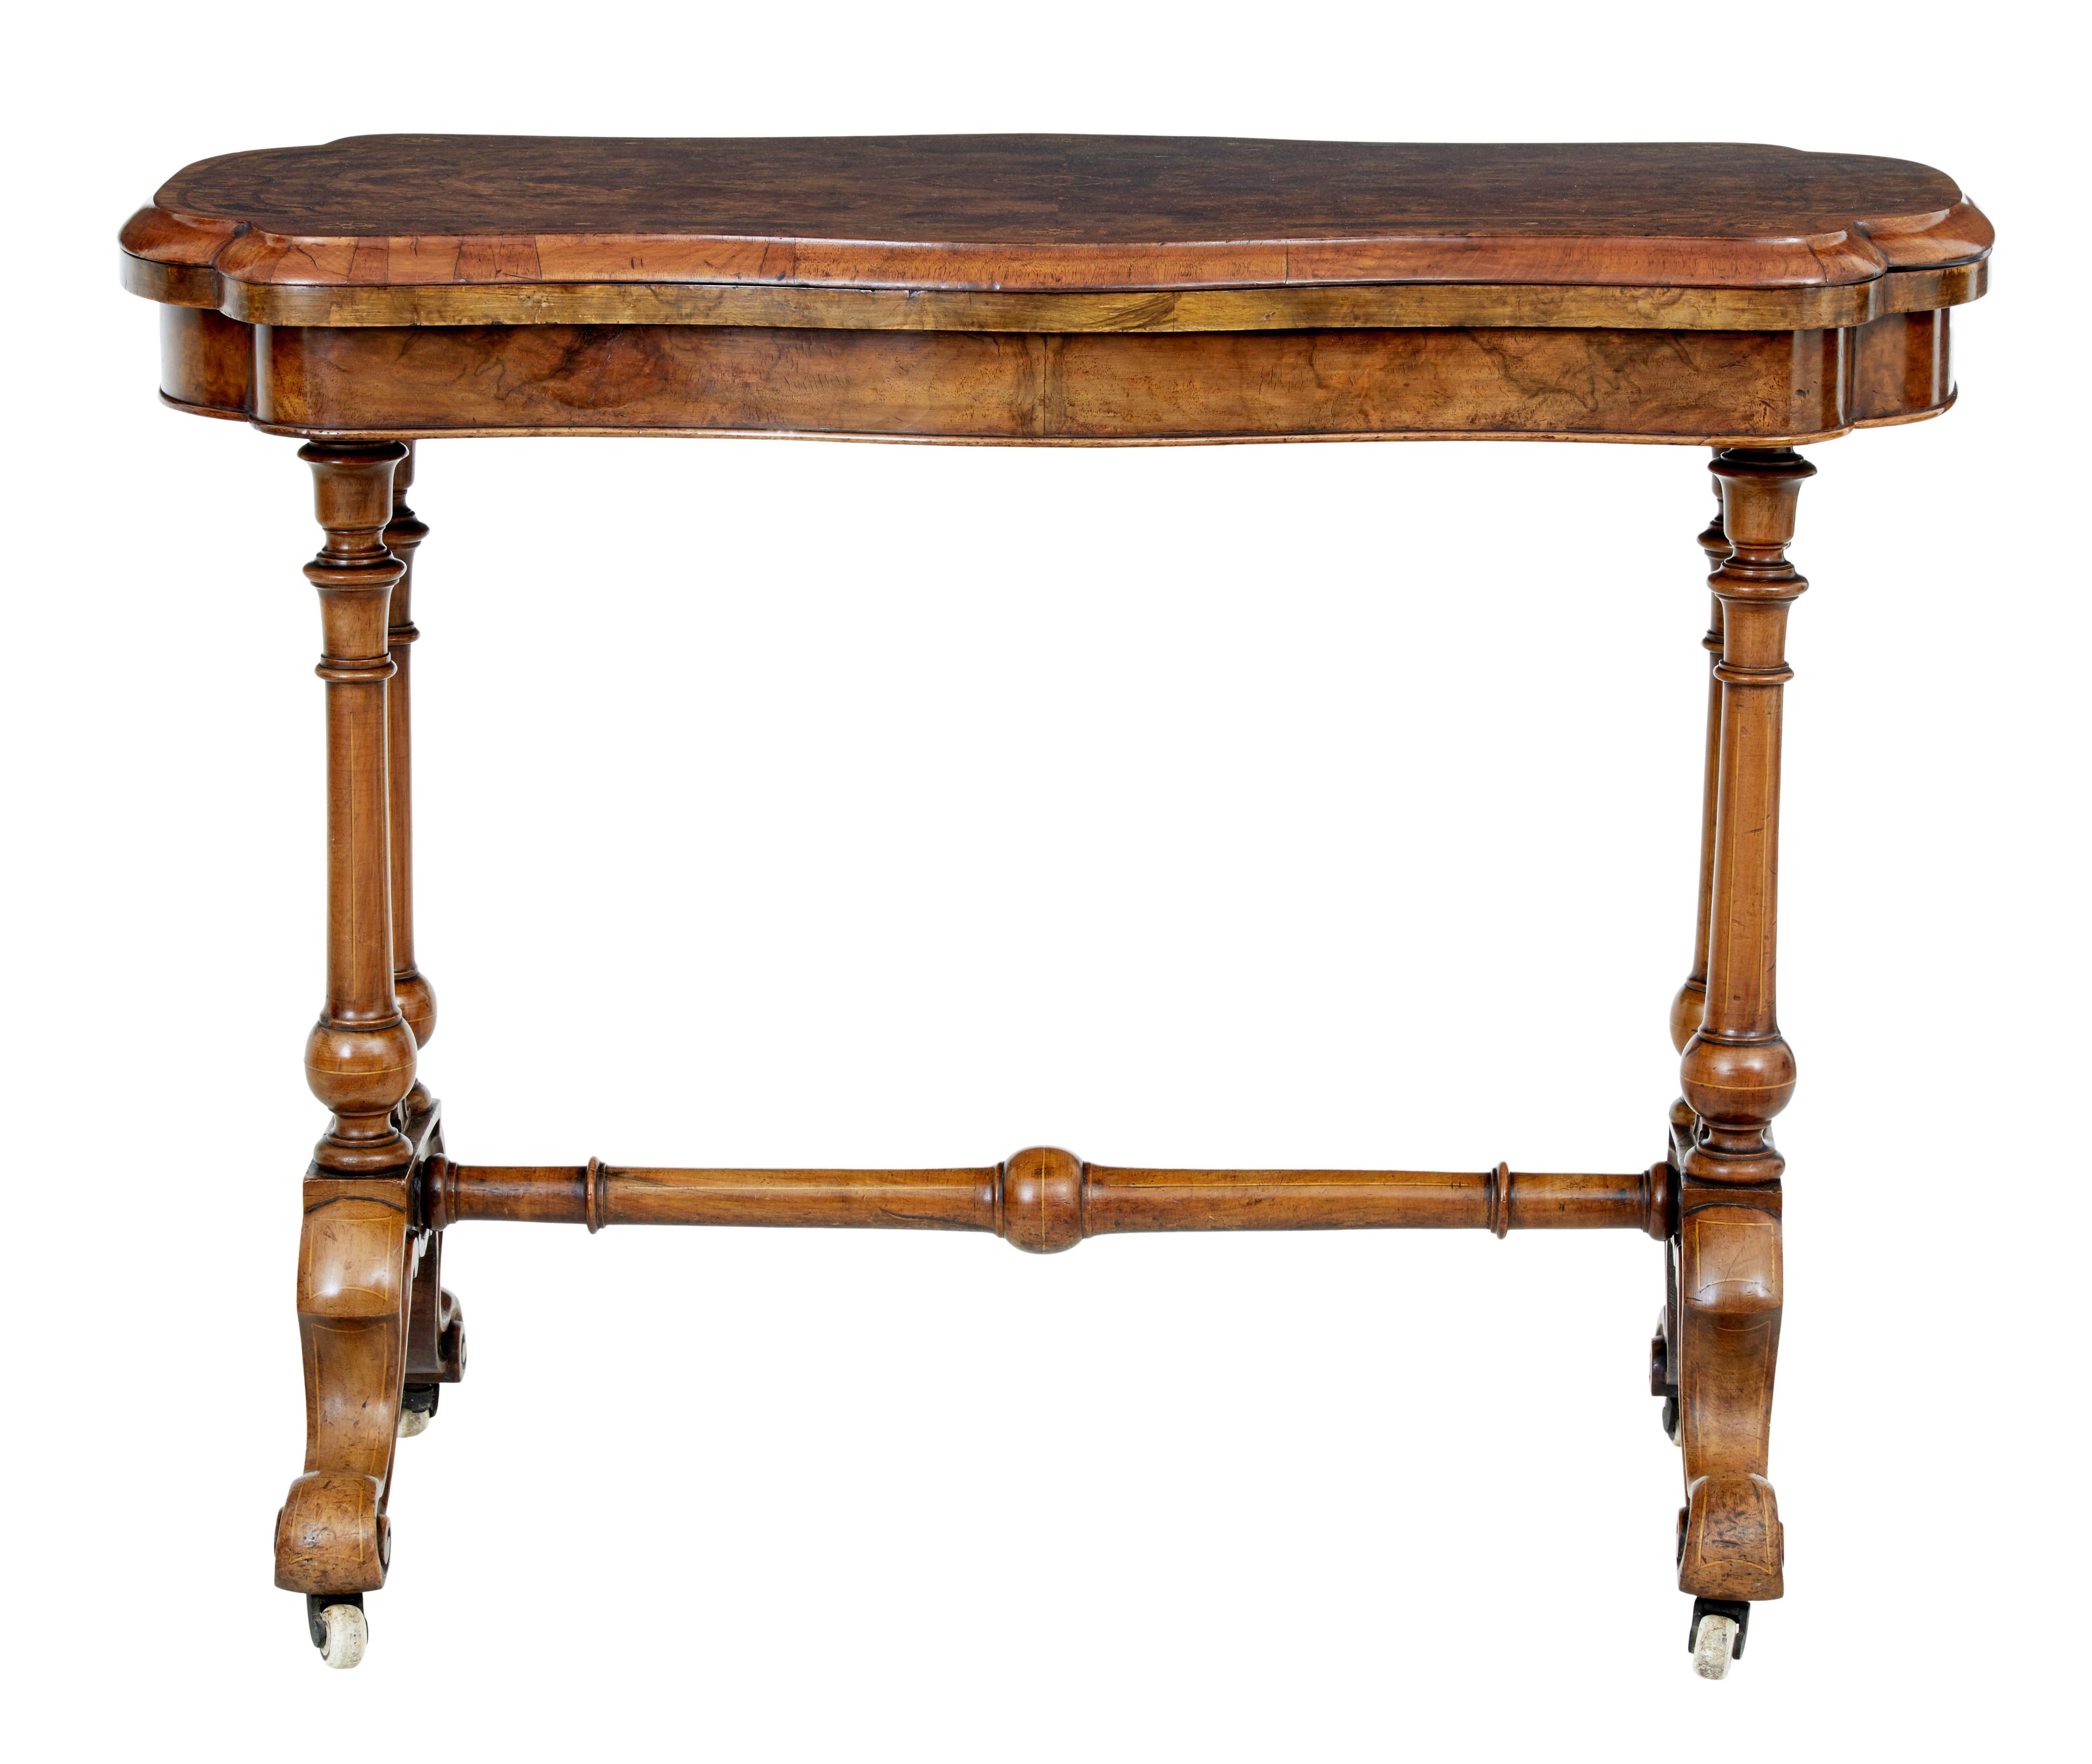 Decorative high Victorian walnut card table, circa 1870.

Shaped burr walnut top with inlaid patterns and crossbanded decoration. Top swivels to reveal a storage well and opens to a green baize playing surface.

Standing on 4 turned legs united